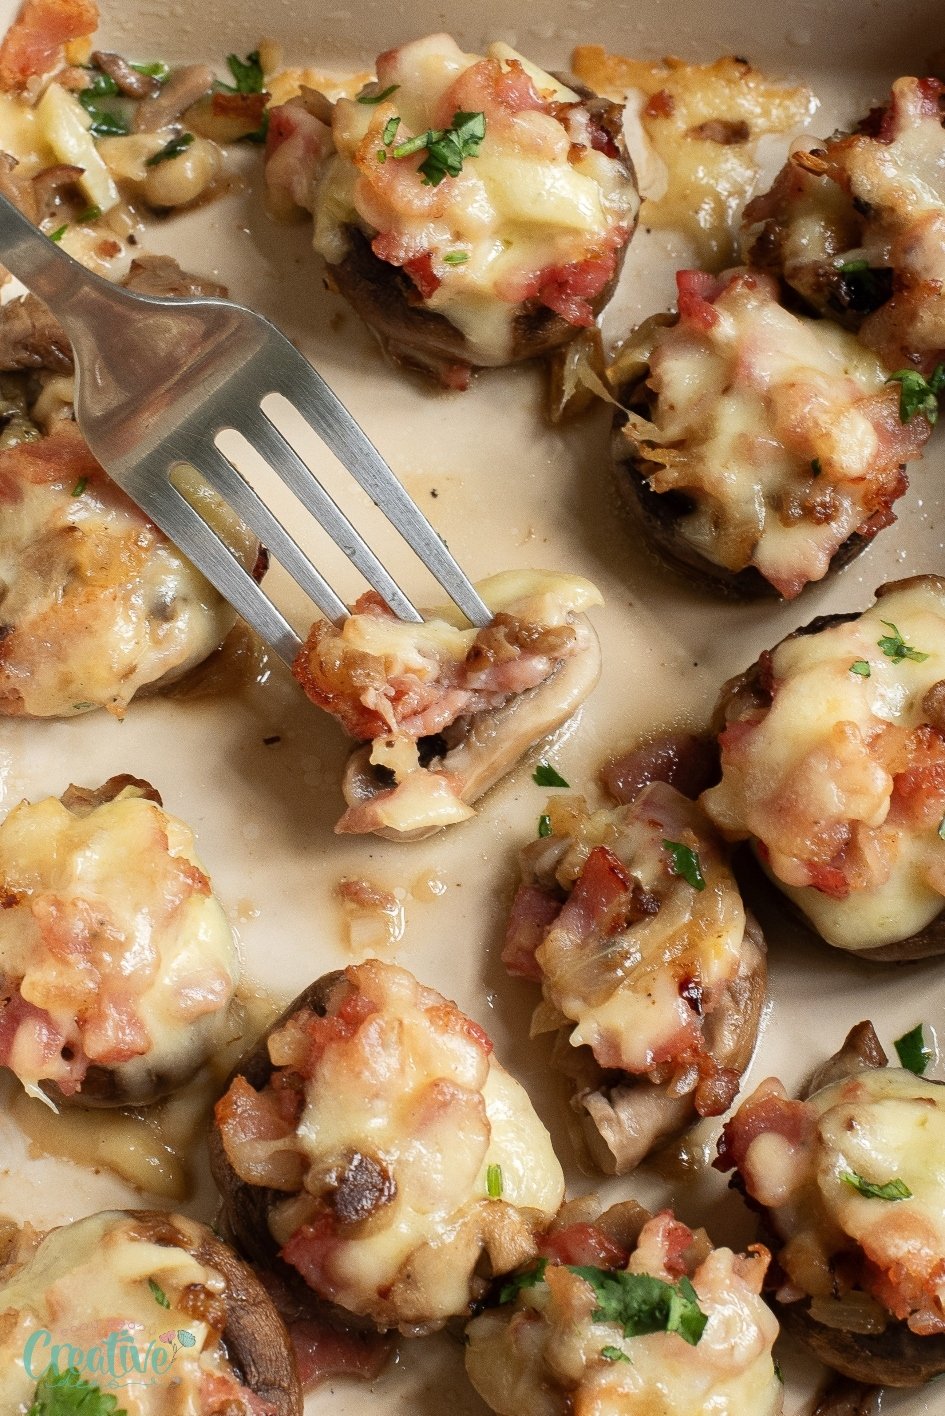 Flavorful bacon cheese stuffed mushroom appetizers - a tasty way to use up leftover mushrooms at your next gathering.